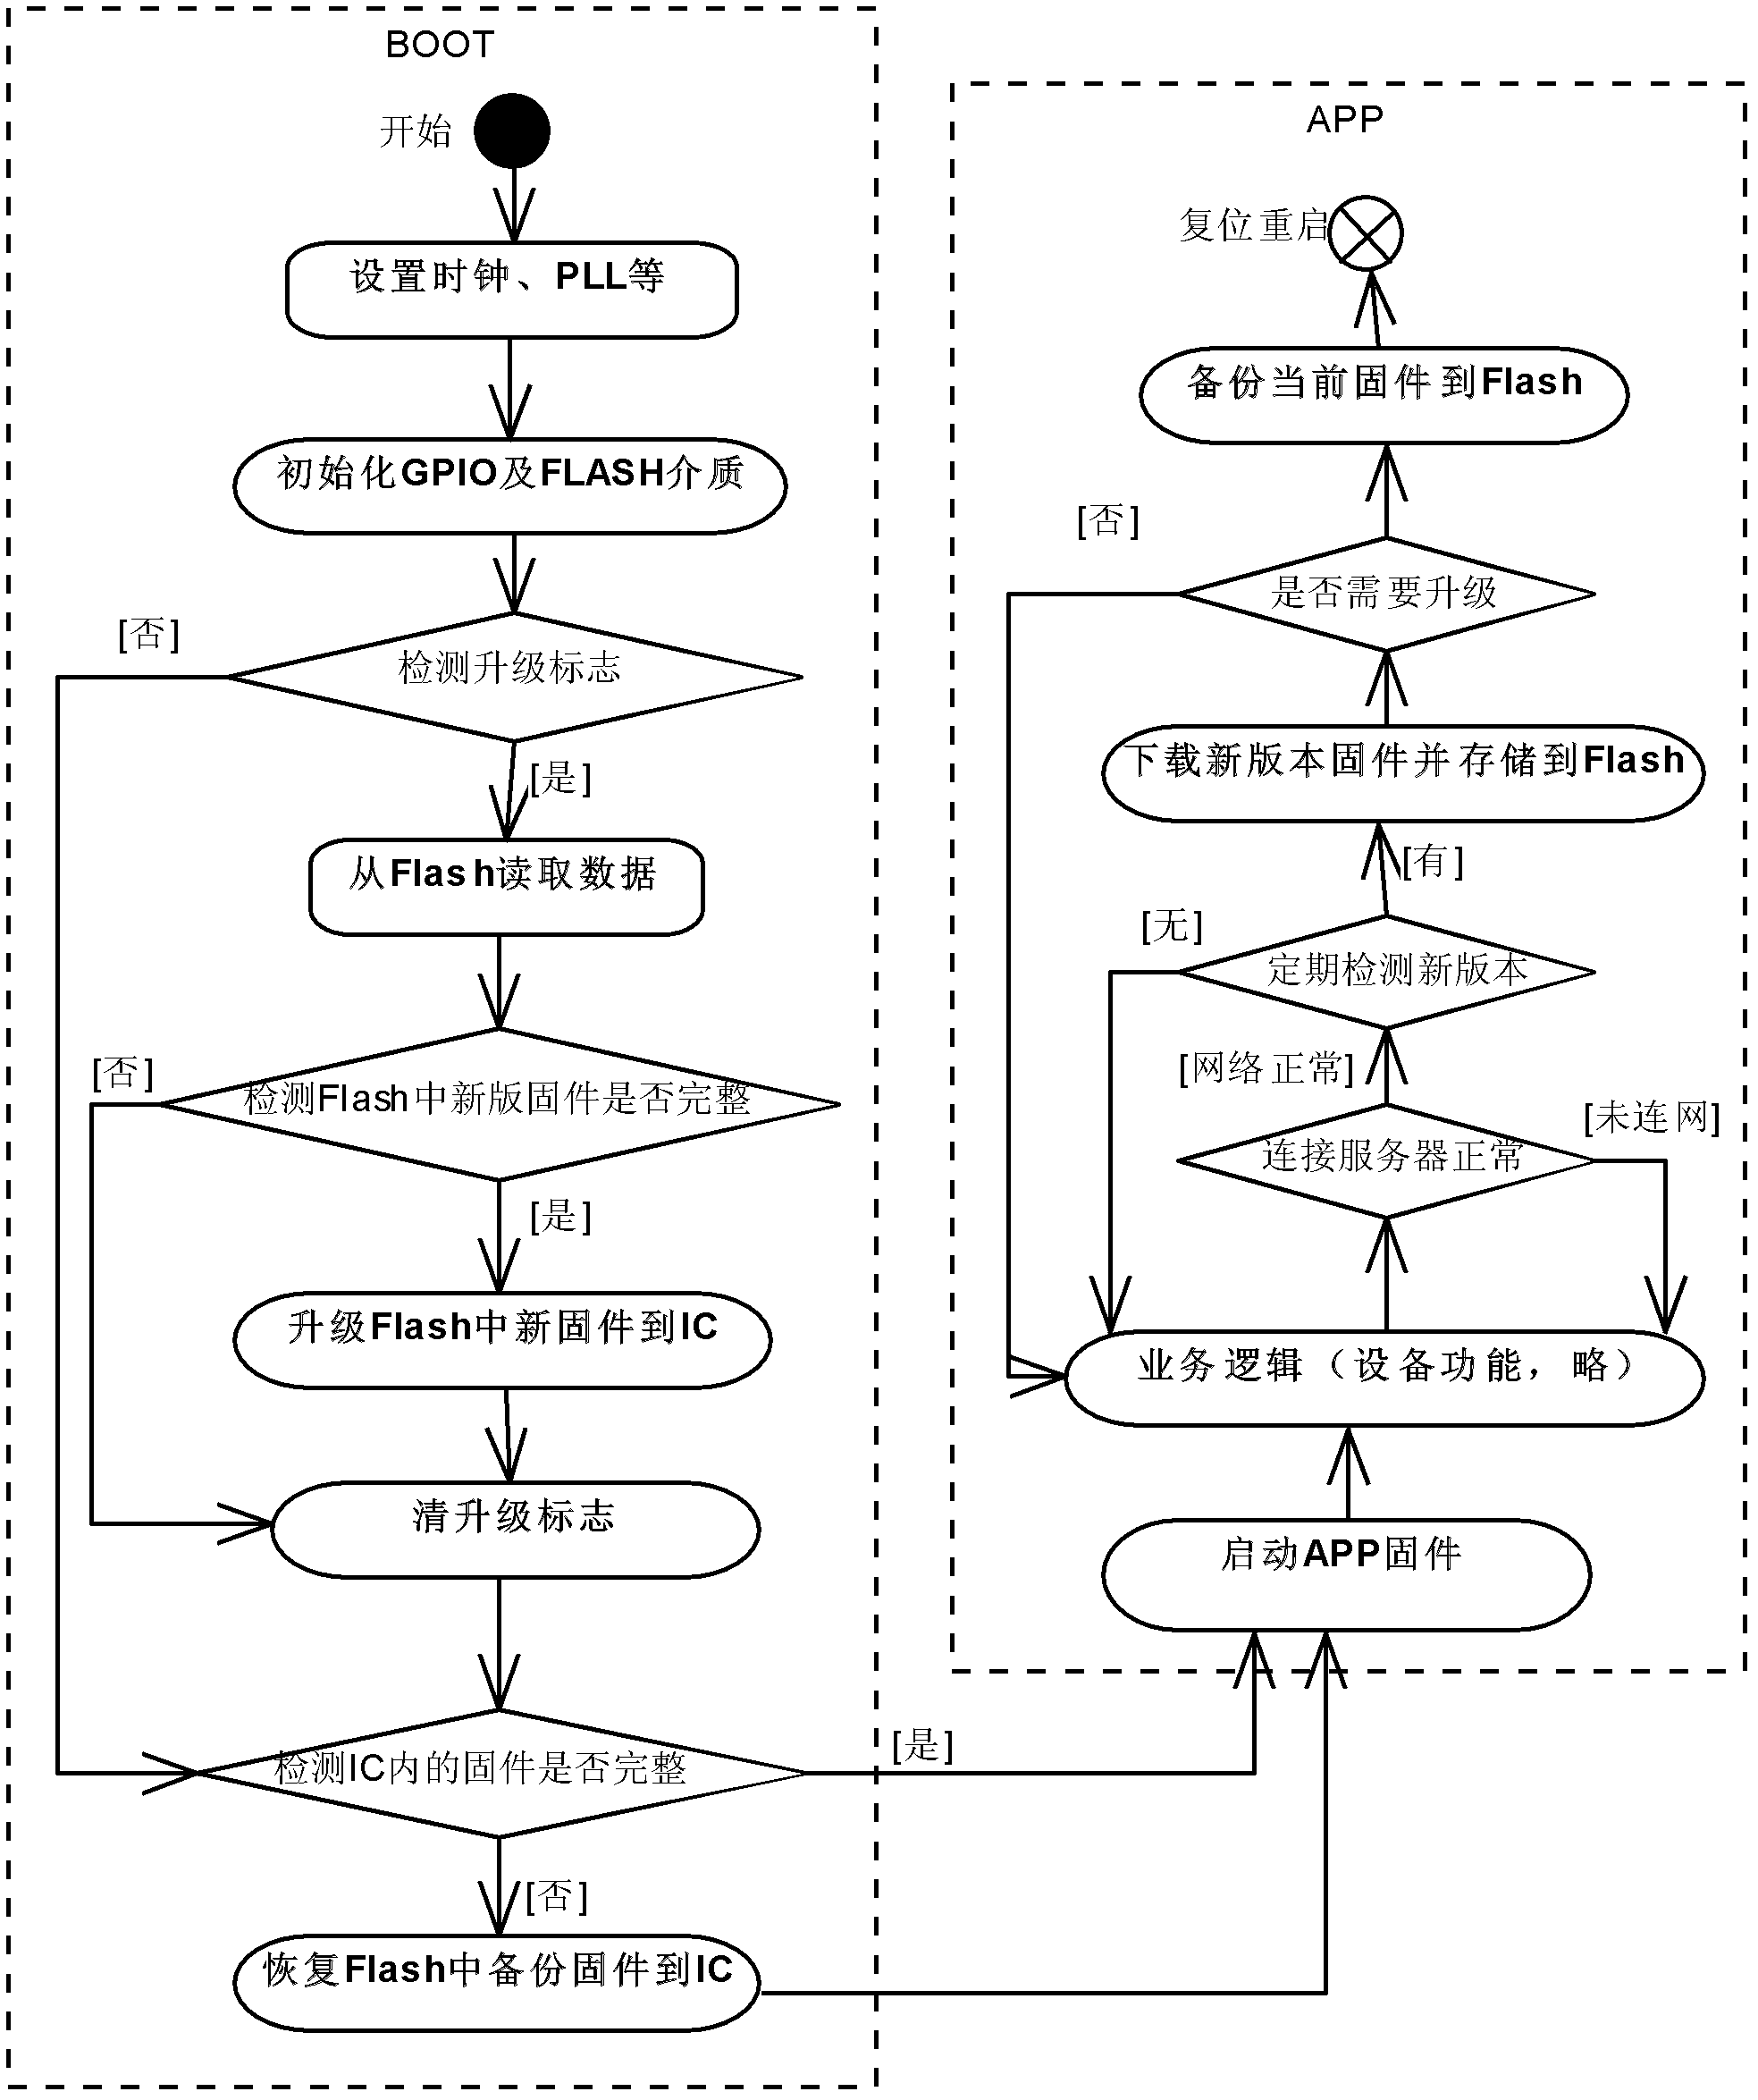 Method for remotely reliably upgrading XIP (execute in place) chip software